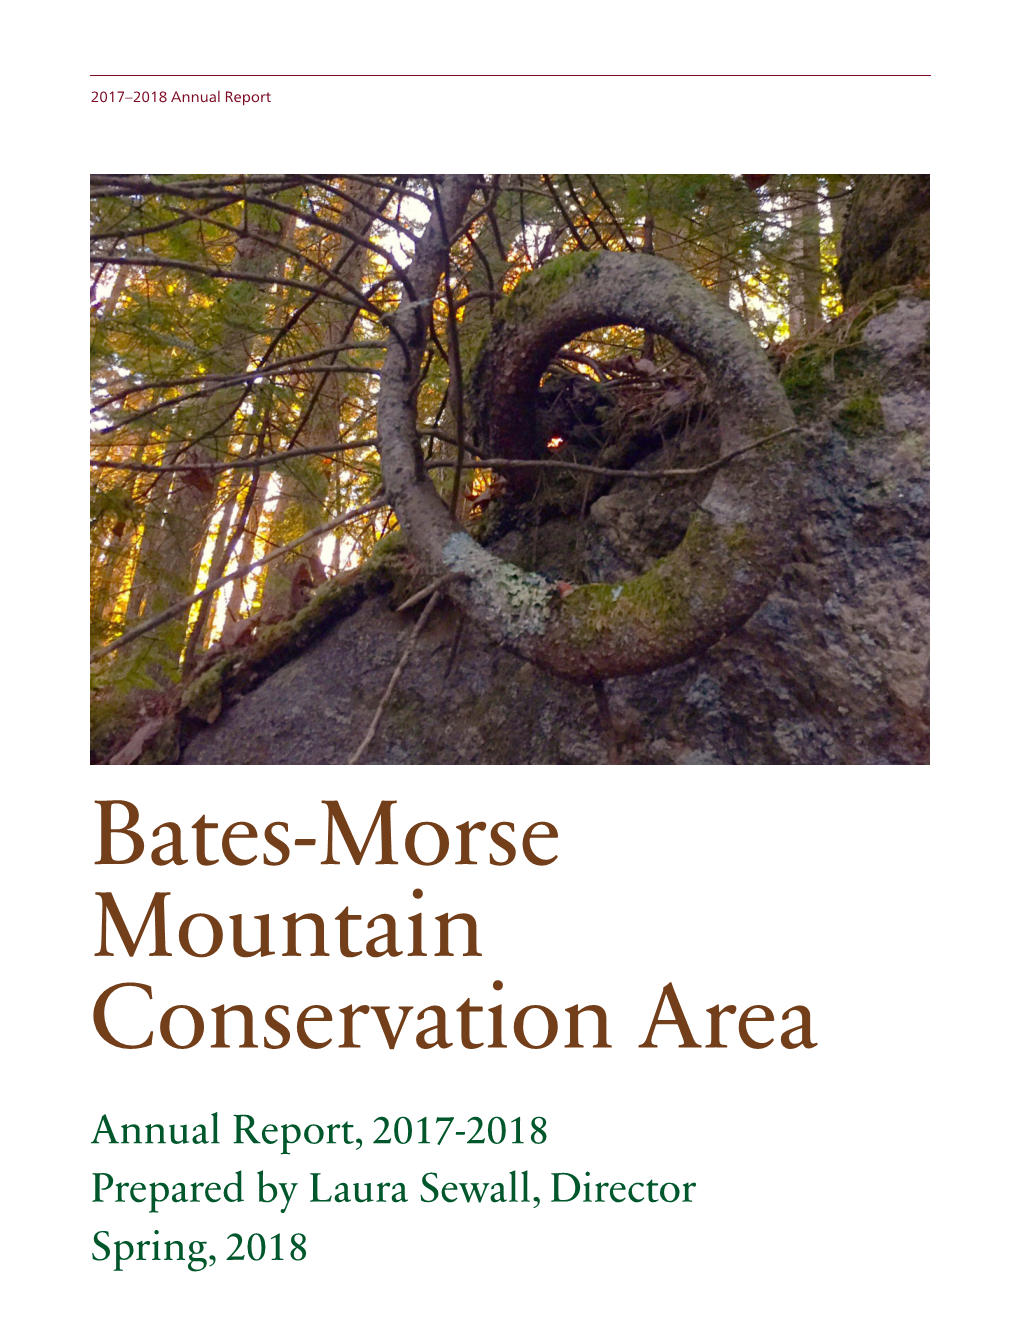 Bates-Morse Mountain Conservation Area Annual Report, 2017-2018 Prepared by Laura Sewall, Director Spring, 2018